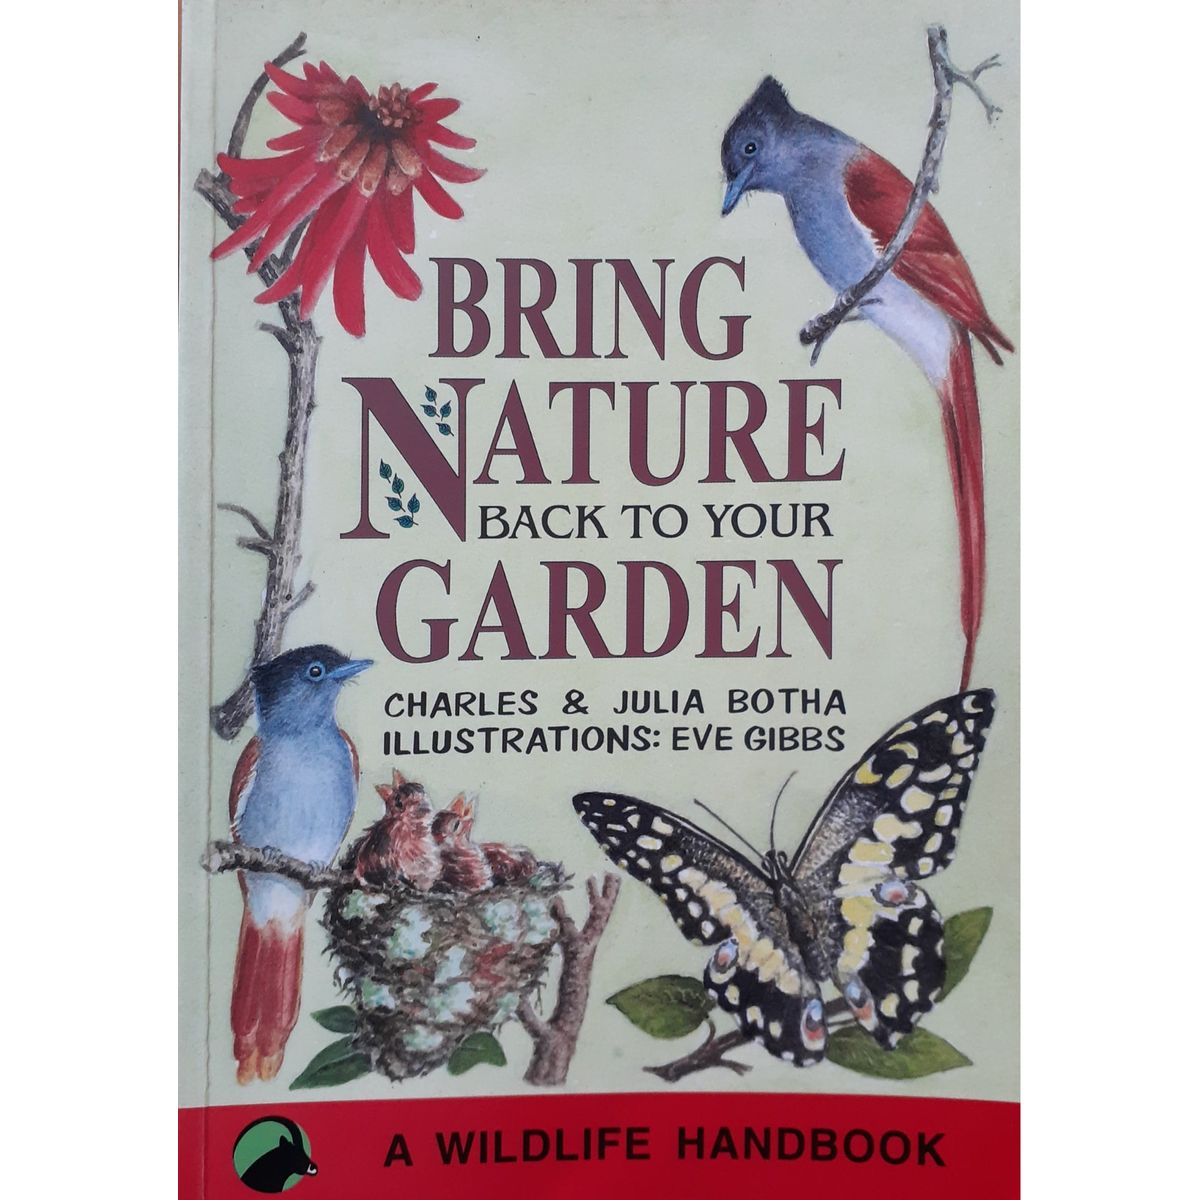 ISBN: 9781874975038 / 1874975035 - Bring Nature back into Your Garden by Charles & Julia Botha [1997]